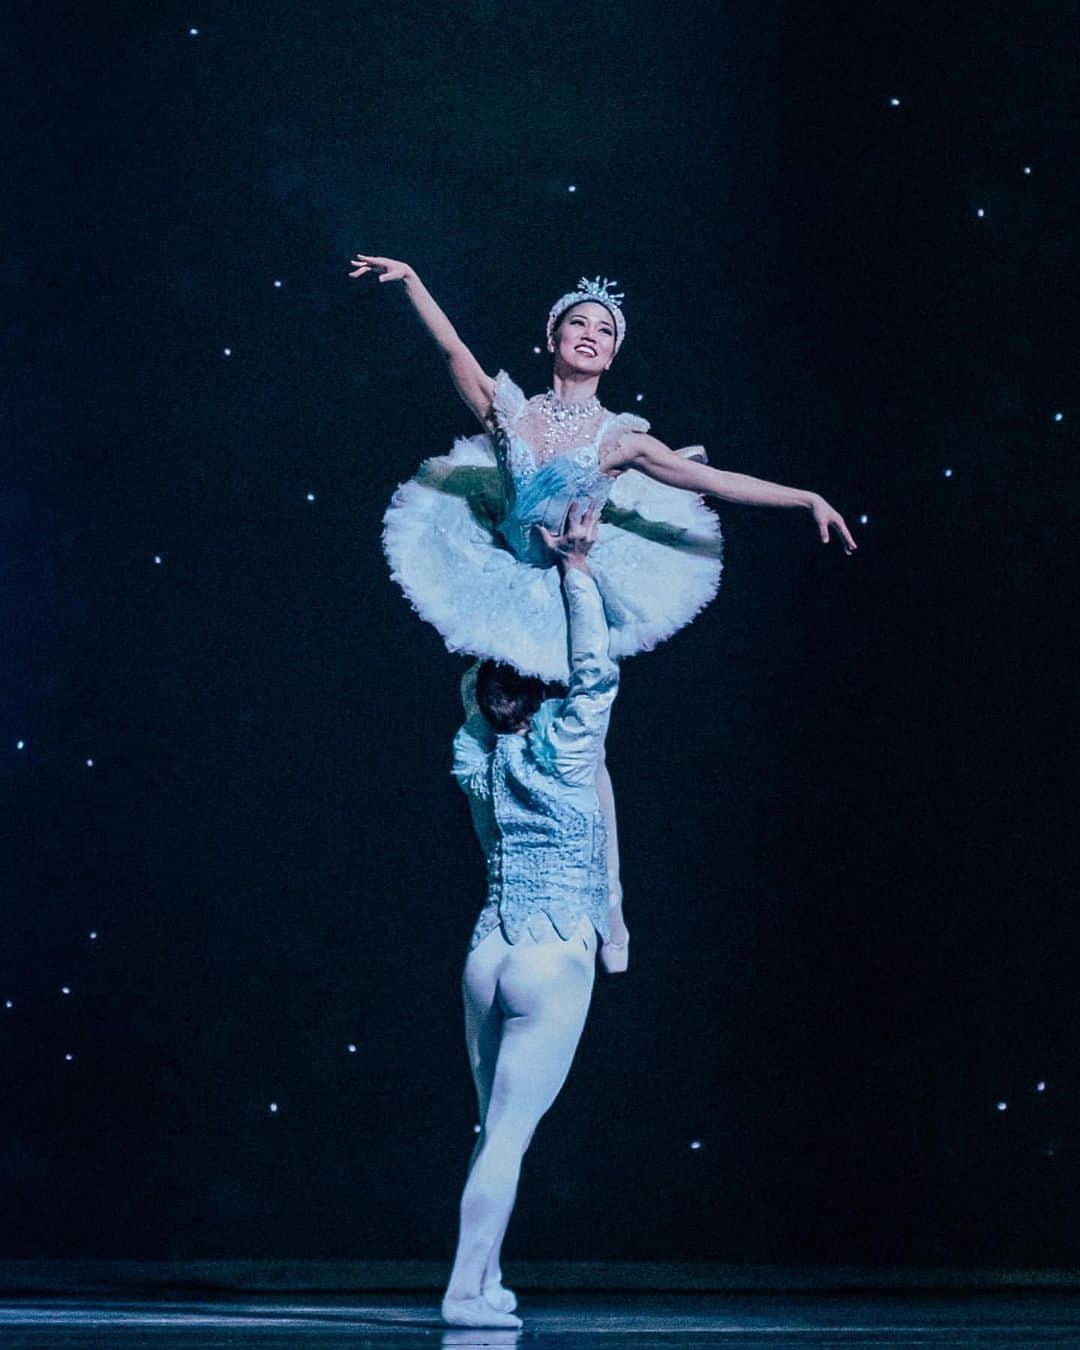 Lily Saito (齊藤莉理)のインスタグラム：「Let it snow, let it snow, let it snow ❄️💙  So happy to be back performing again!🙏🏻😍 #Grateful  |📸 @lydiamcraephotography |」